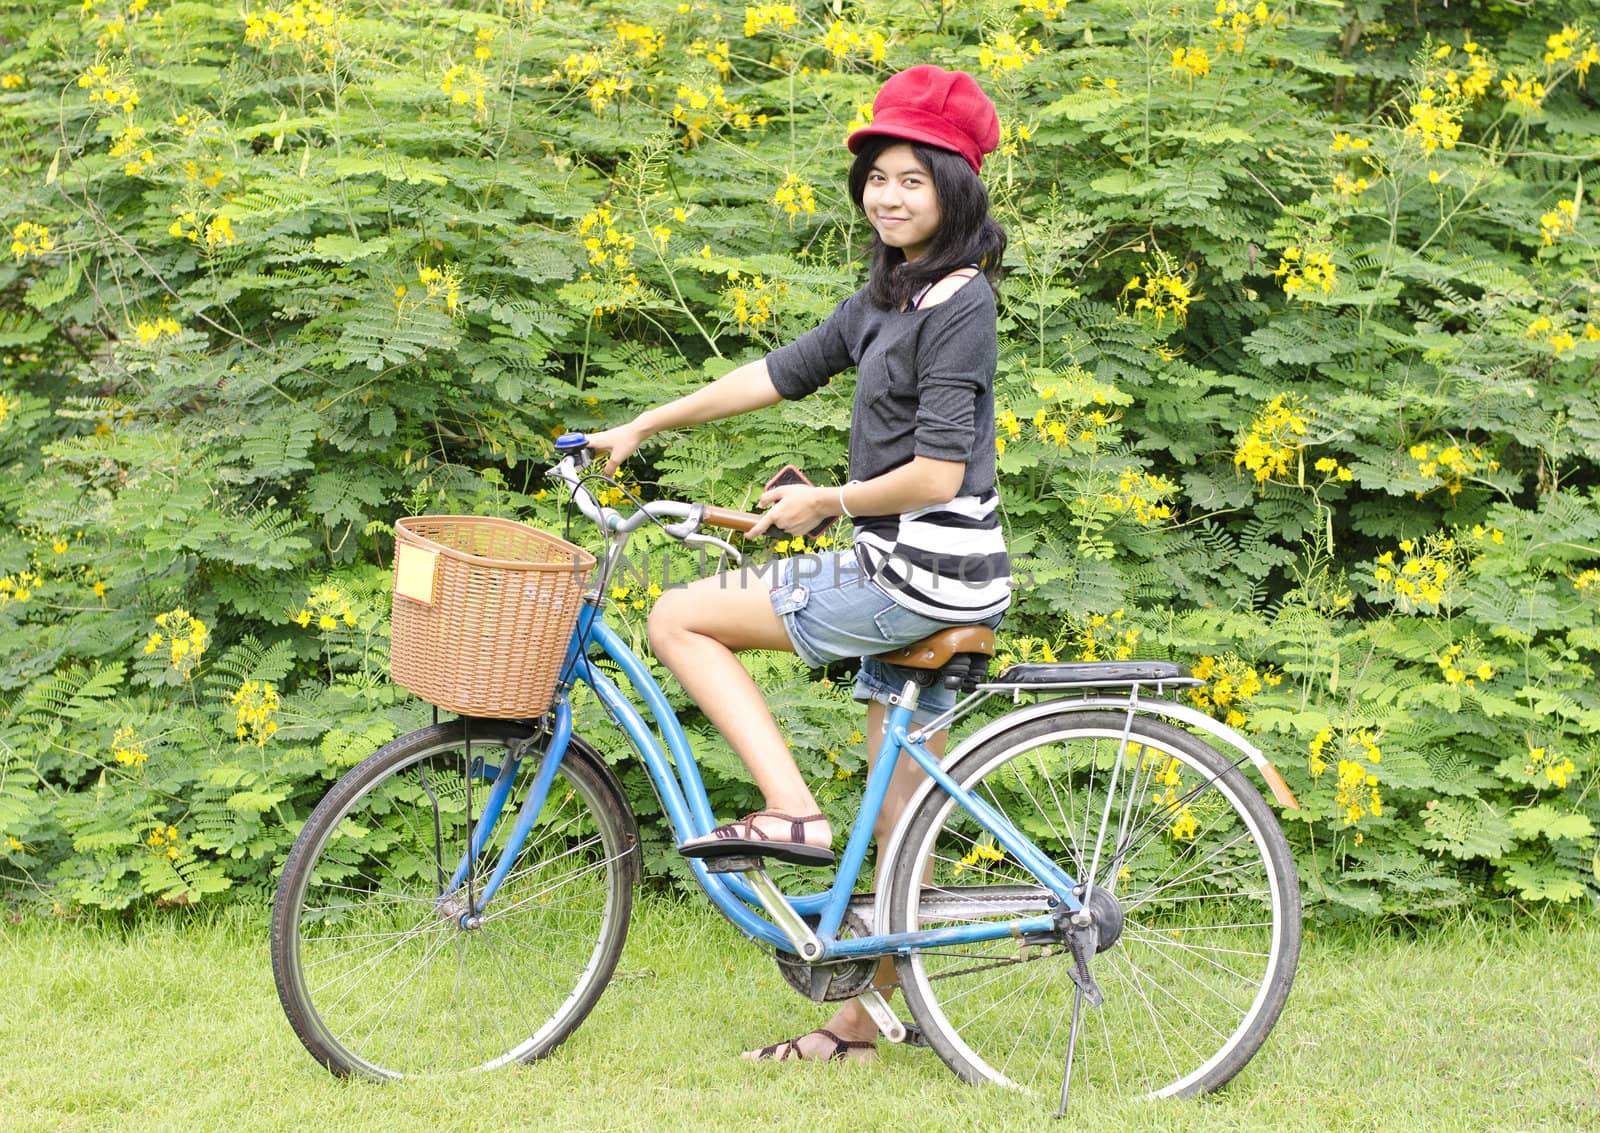 Portrait of pretty young woman with bicycle in a park smiling - Outdoor 